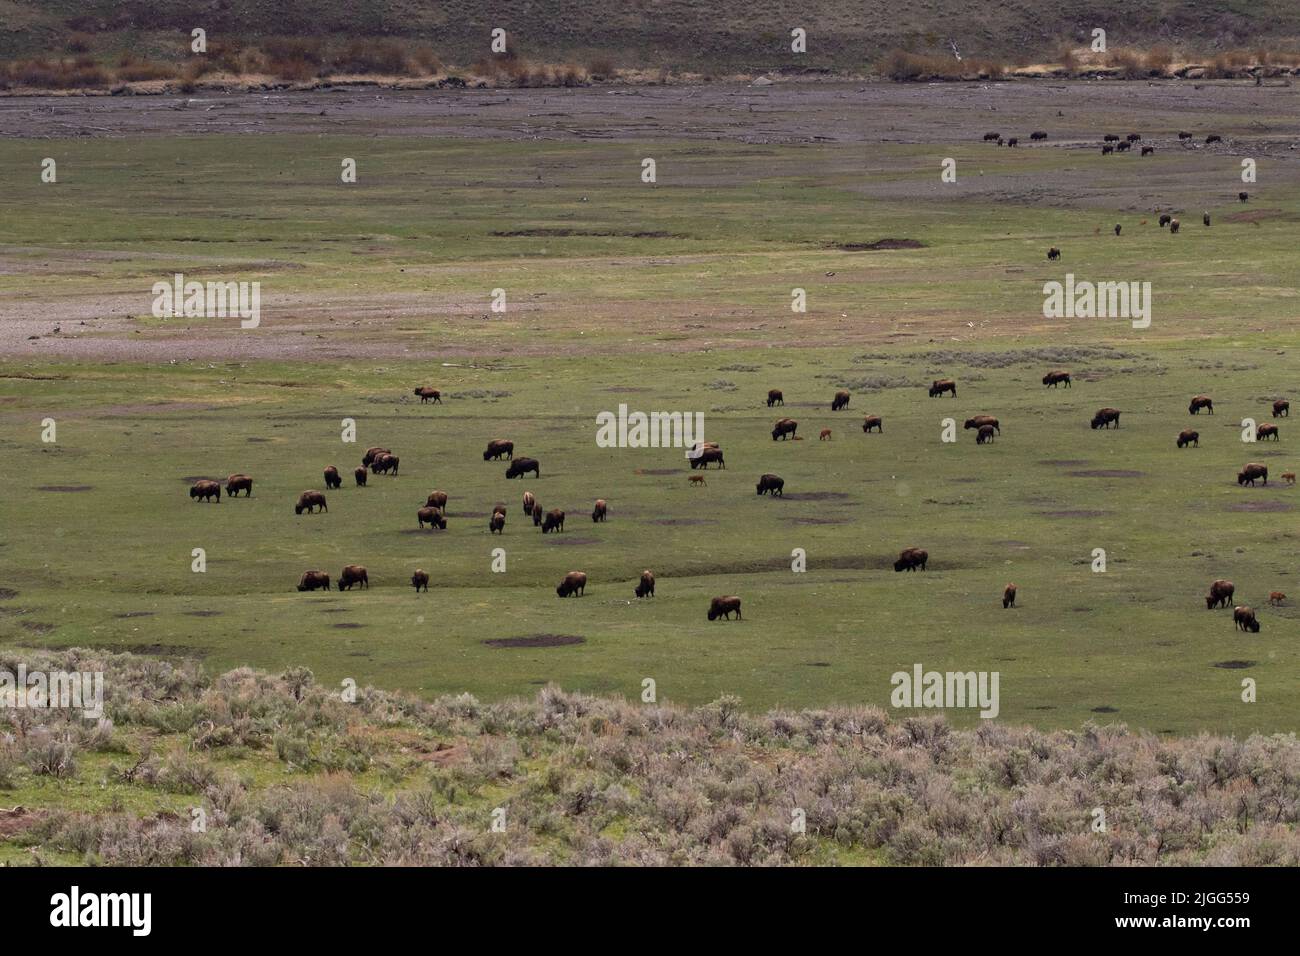 A bison herd, Bison bison, grazing in the scenic Lamar Valley of Yellowstone NP, WY, USA during pre-flood, park closure, 5/22. Stock Photo